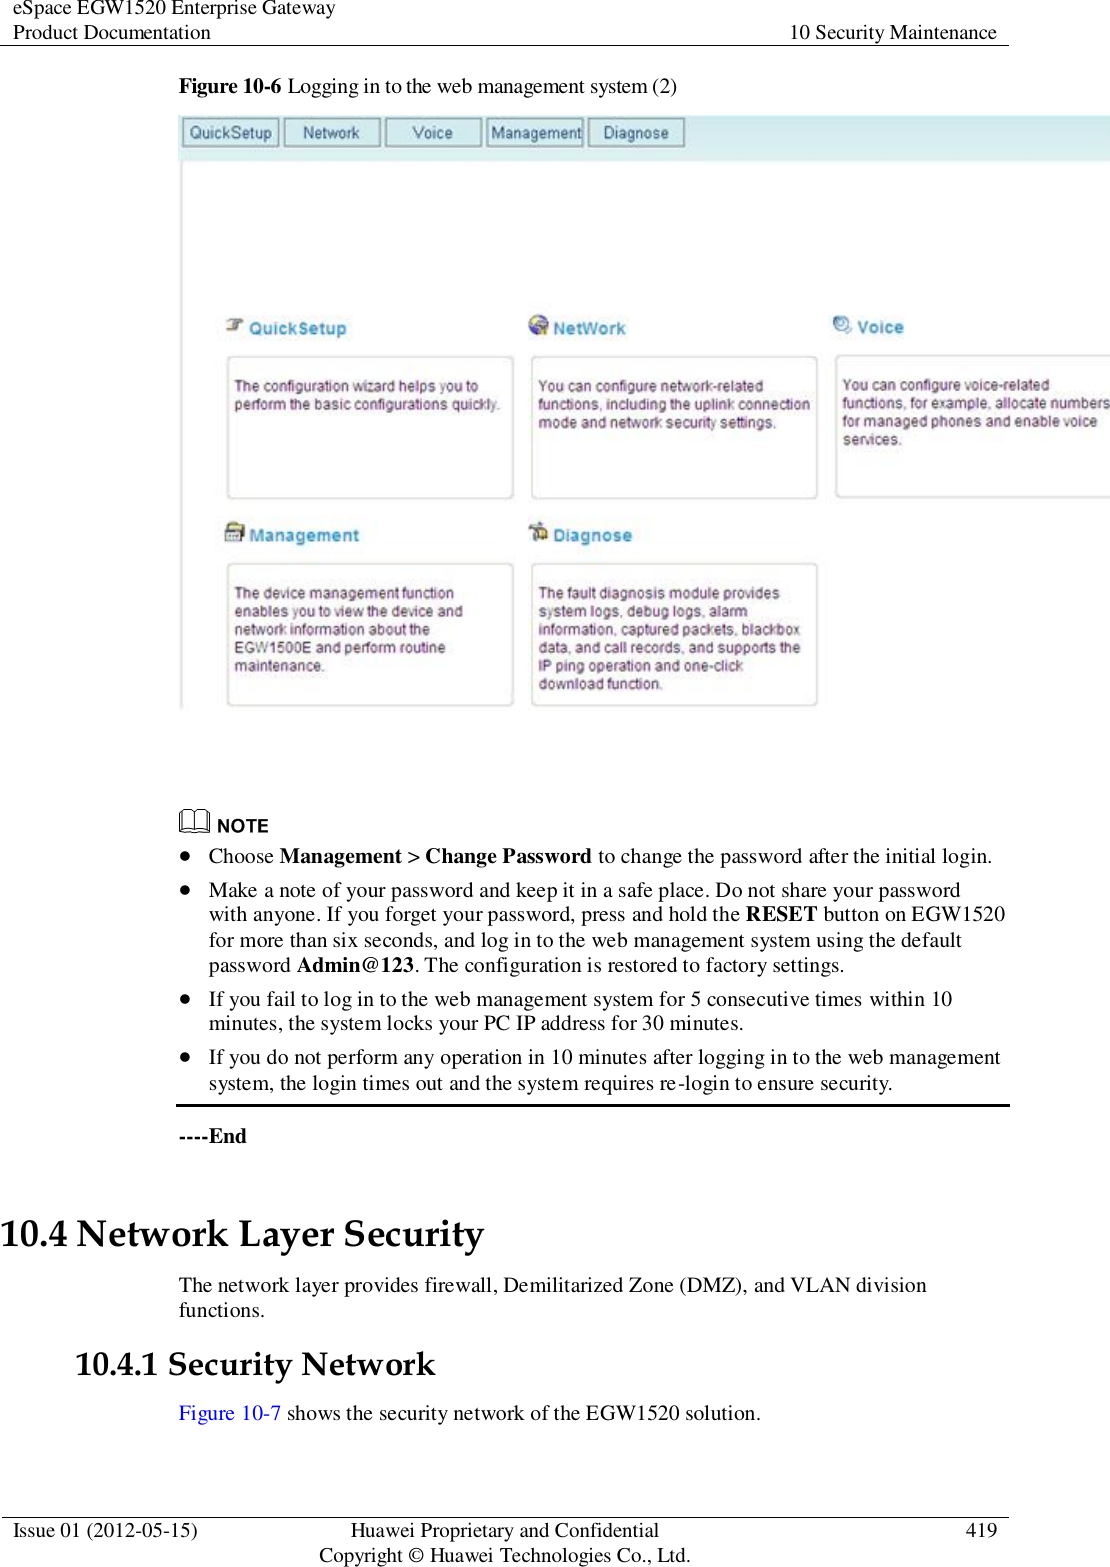 eSpace EGW1520 Enterprise Gateway Product Documentation 10 Security Maintenance  Issue 01 (2012-05-15) Huawei Proprietary and Confidential                                     Copyright © Huawei Technologies Co., Ltd. 419  Figure 10-6 Logging in to the web management system (2)      Choose Management &gt; Change Password to change the password after the initial login.  Make a note of your password and keep it in a safe place. Do not share your password with anyone. If you forget your password, press and hold the RESET button on EGW1520 for more than six seconds, and log in to the web management system using the default password Admin@123. The configuration is restored to factory settings.  If you fail to log in to the web management system for 5 consecutive times within 10 minutes, the system locks your PC IP address for 30 minutes.  If you do not perform any operation in 10 minutes after logging in to the web management system, the login times out and the system requires re-login to ensure security. ----End 10.4 Network Layer Security The network layer provides firewall, Demilitarized Zone (DMZ), and VLAN division functions. 10.4.1 Security Network Figure 10-7 shows the security network of the EGW1520 solution. 